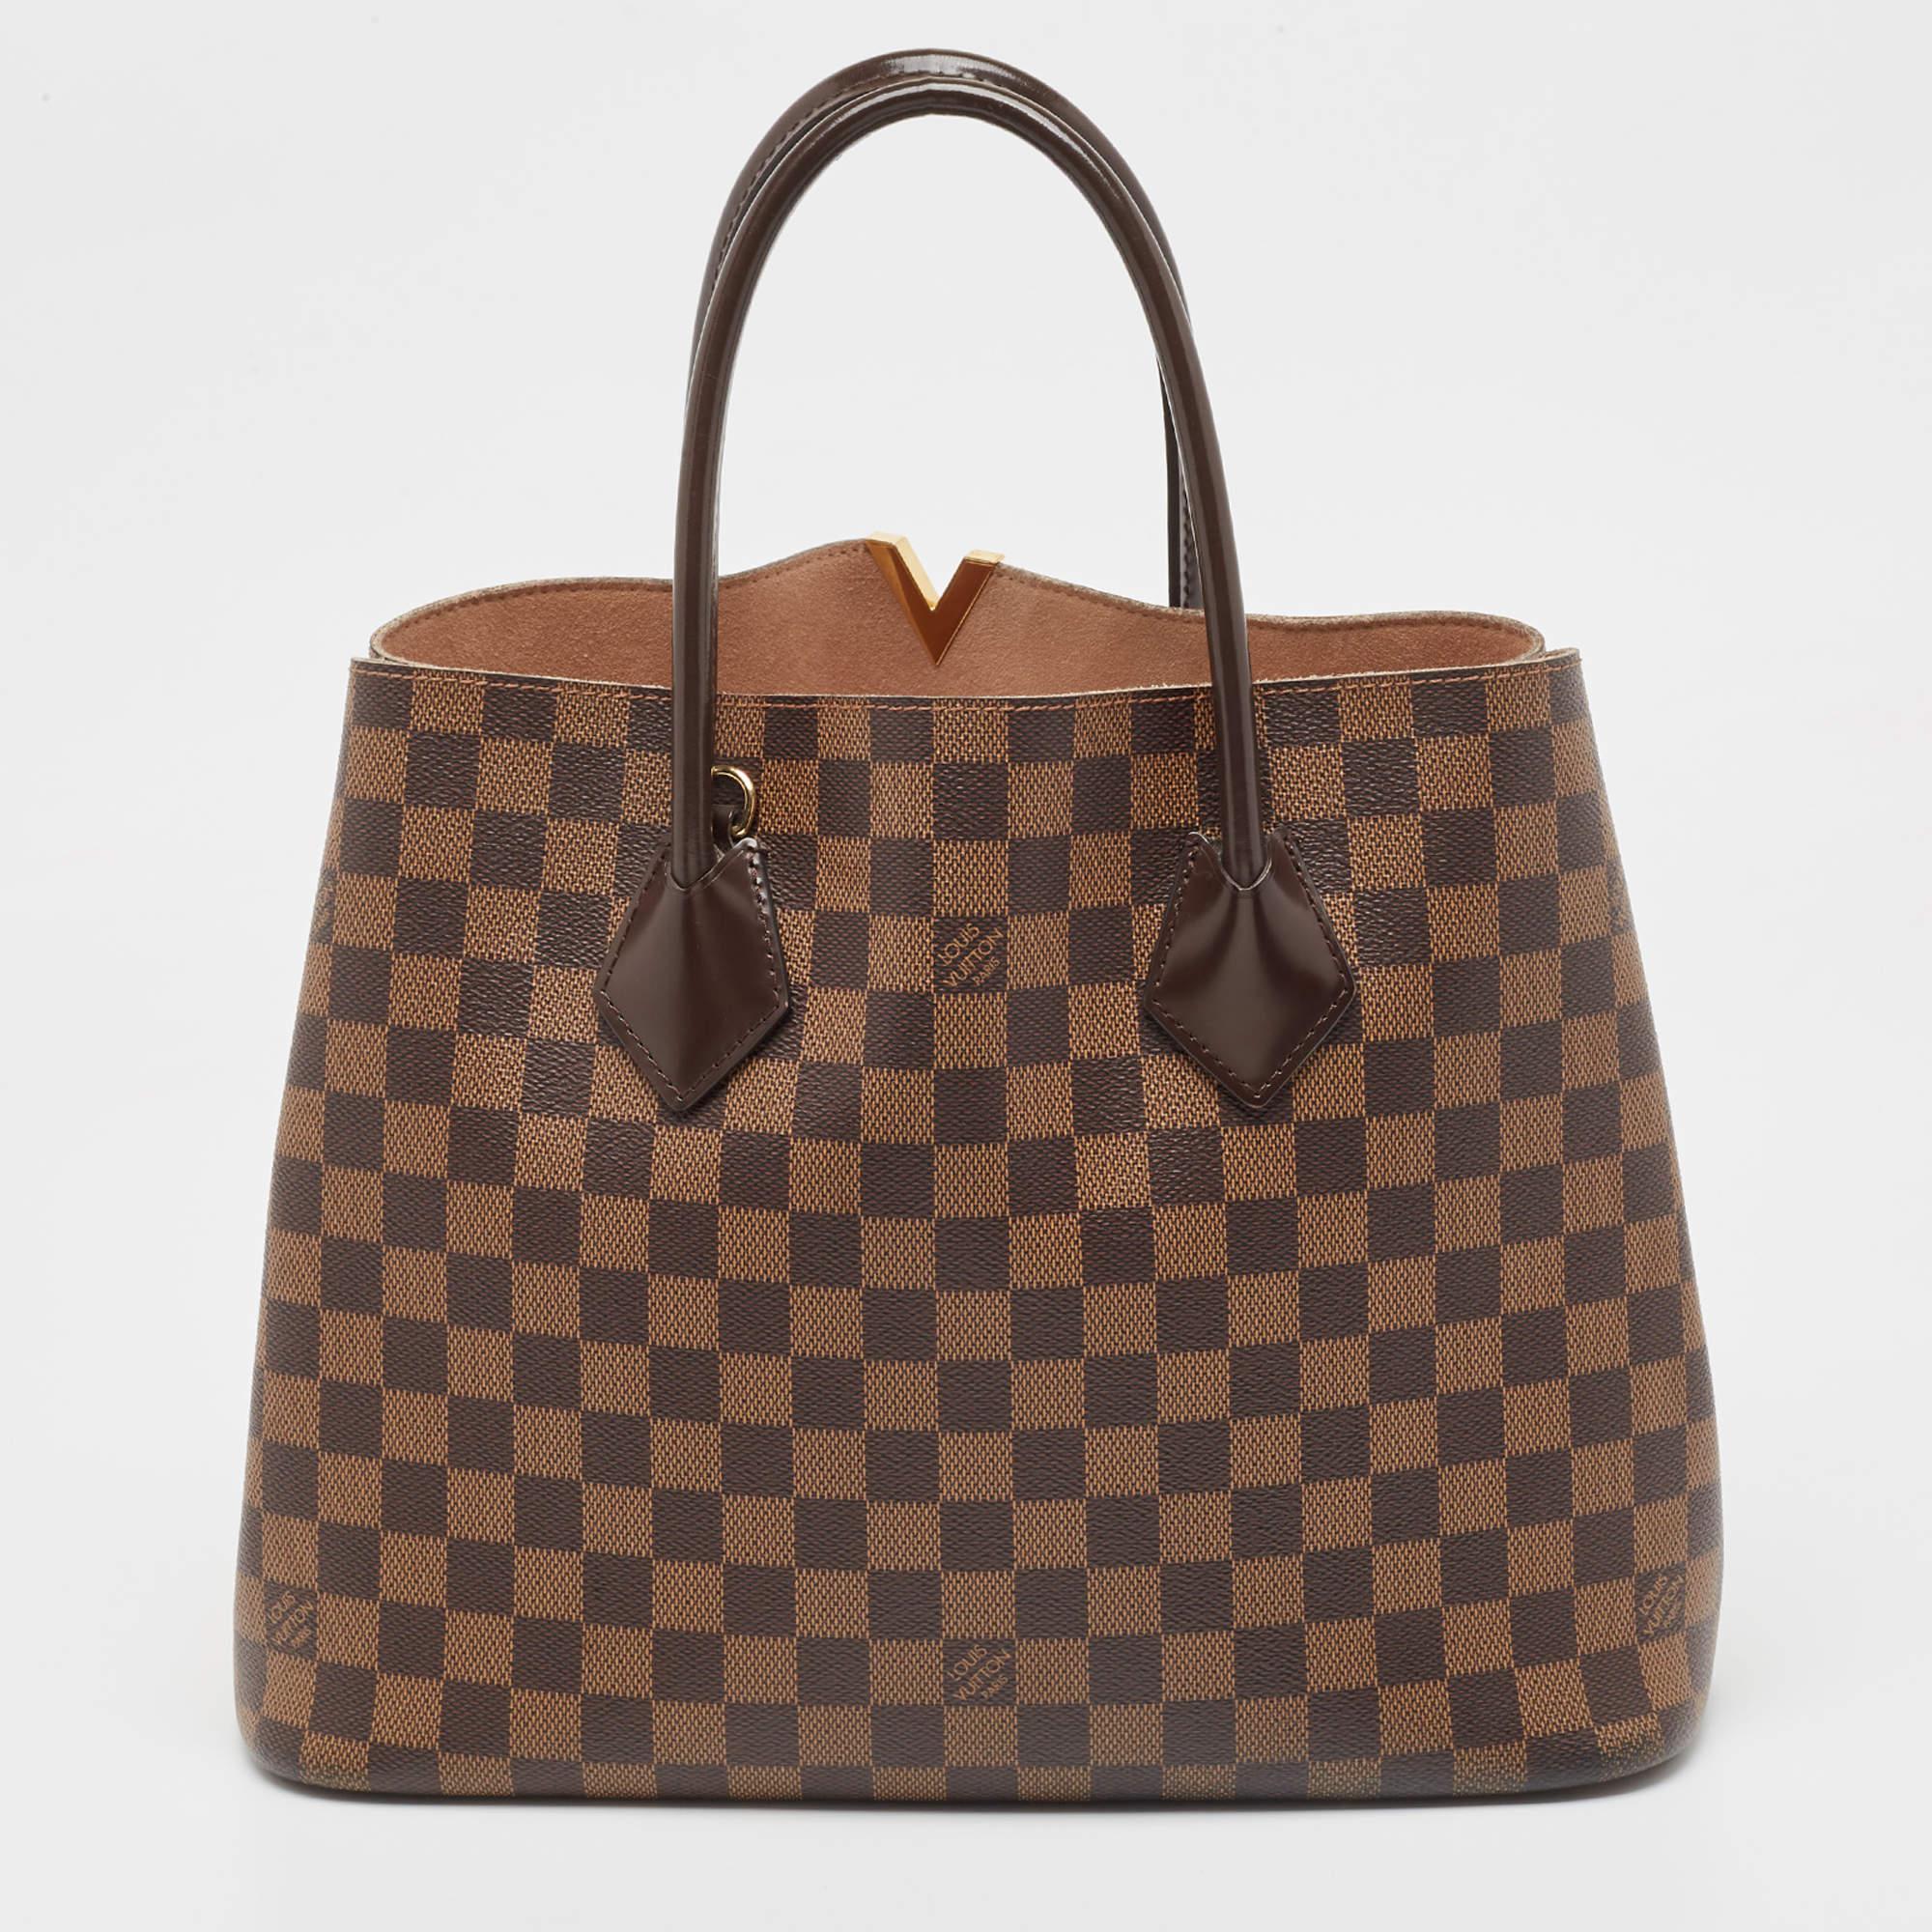 For the woman who is always on the go, Louis Vuitton offers her the Kensington! It is finely made from Damier Ebene canvas and designed as an open top with an Alcantara interior. It comes with two strong handles, protective metal feet, and a